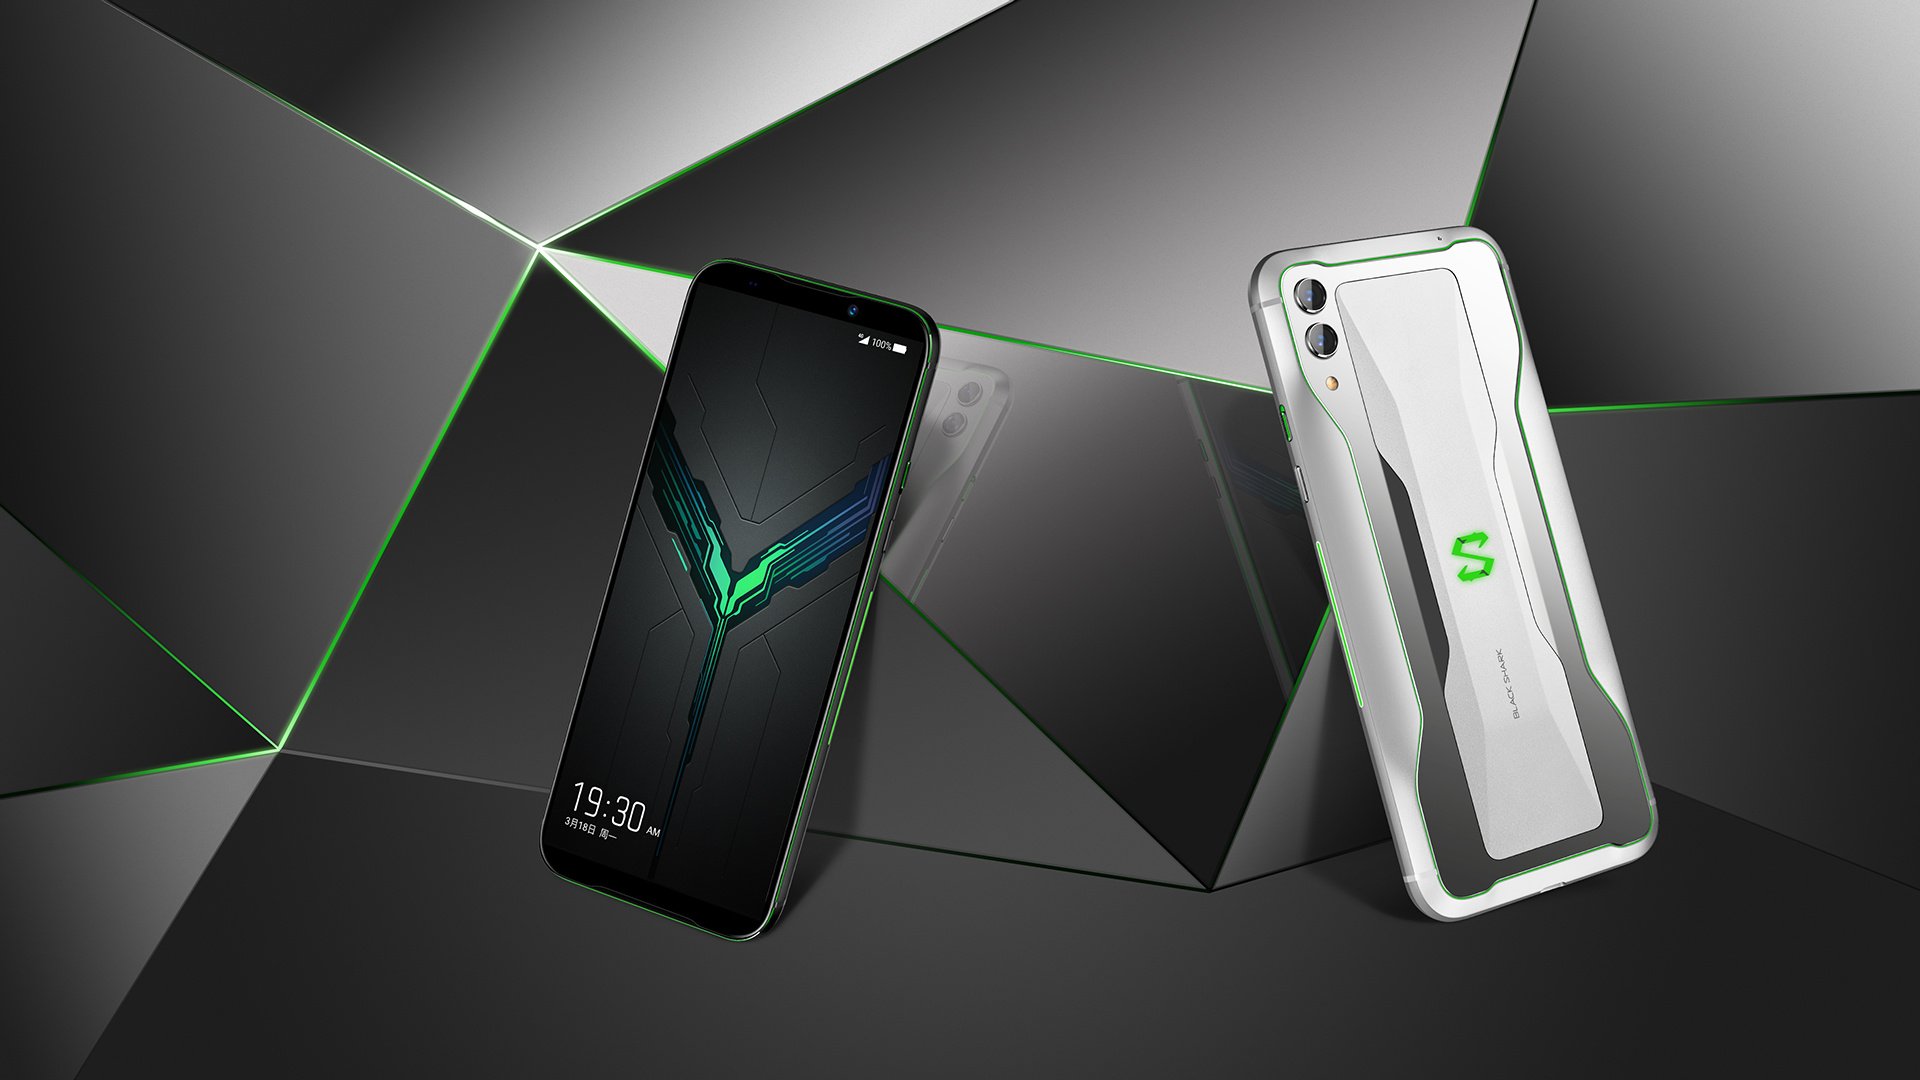 Bad News For Asus As Xiaomi Announces The Release Of Black Shark 2 Pro Which Will Also Feature Snapdragon 855 Plus